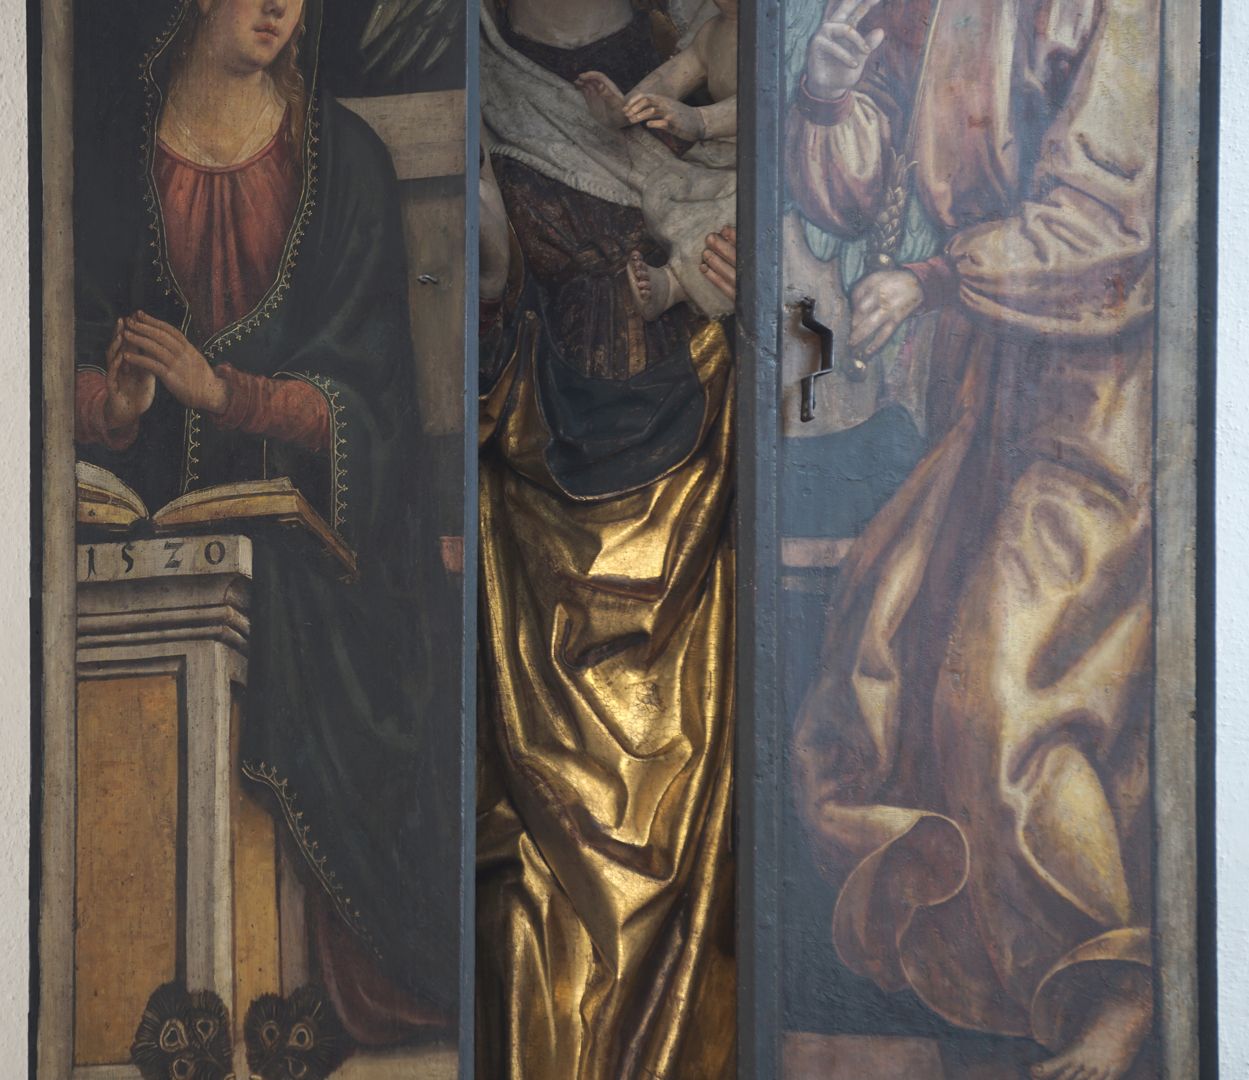 Altar of the Beautiful Mary The altar with closed wings, detail of the two panels of the Annunciation scene and the figure of Mary